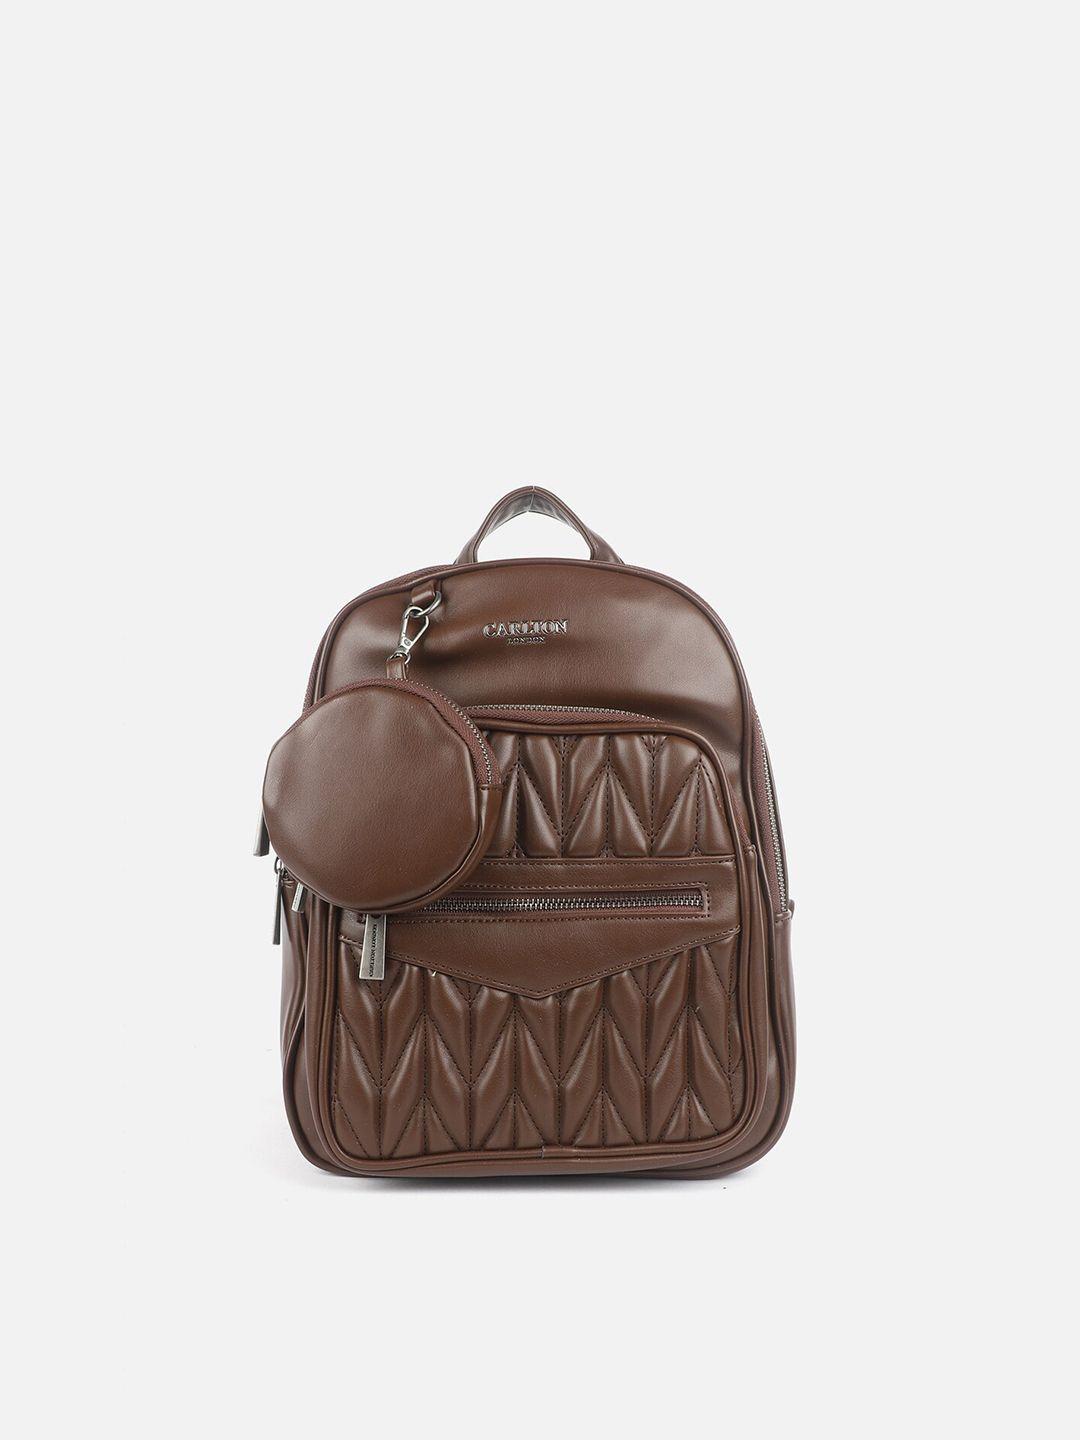 carlton london backpack with quilted details & comes with pouch